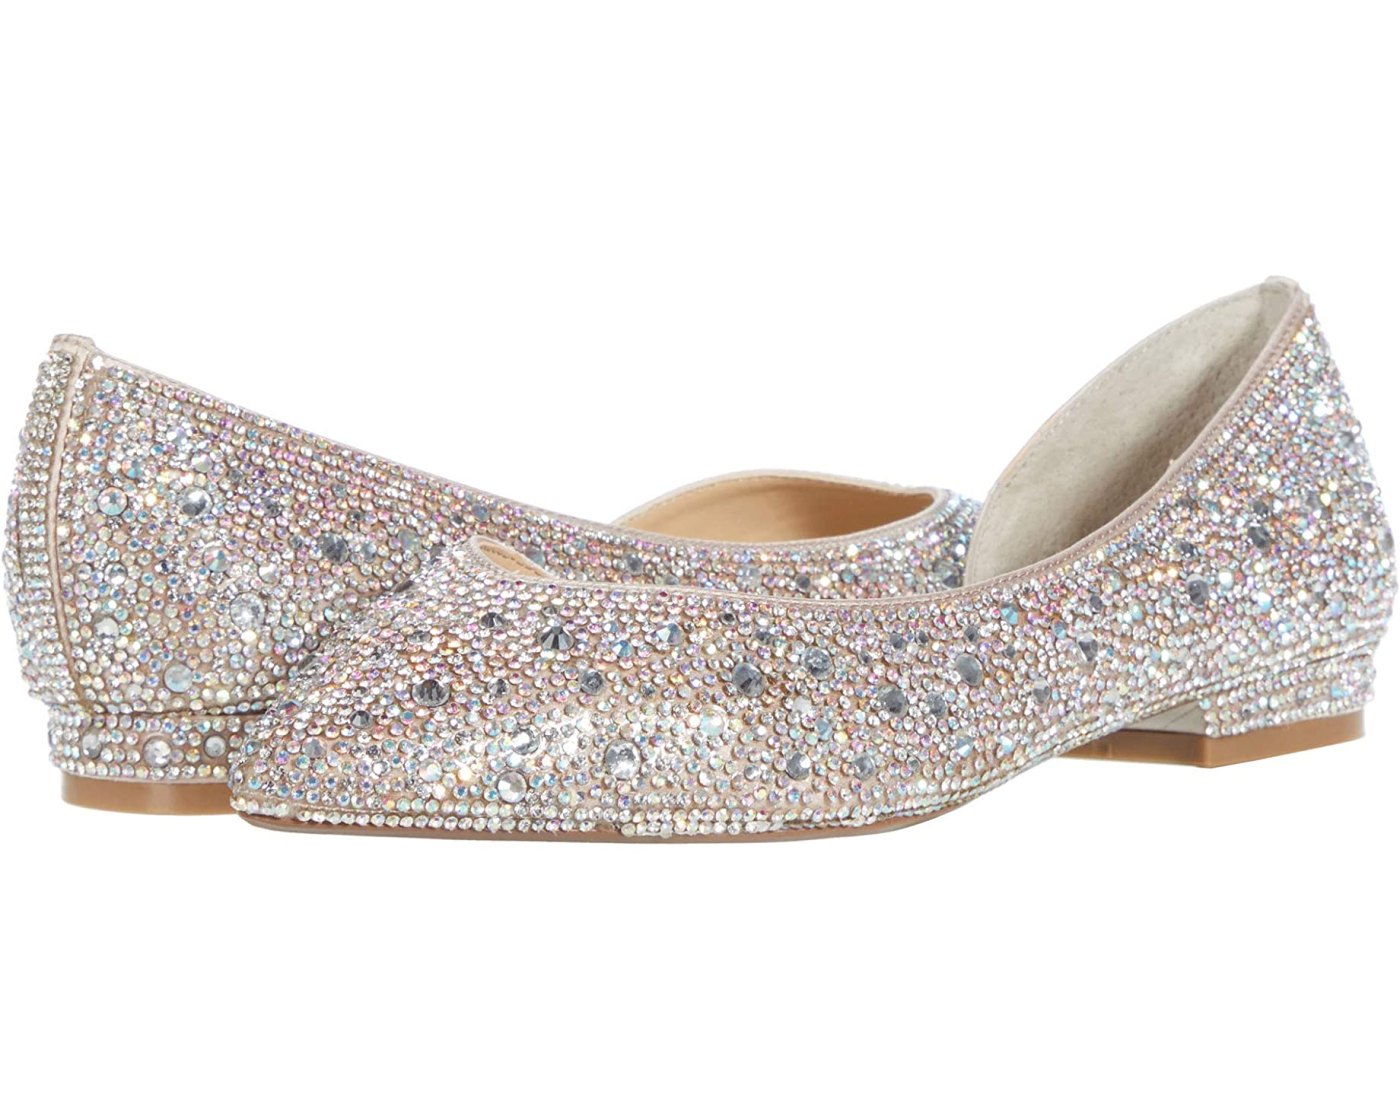 Shop These 9 Sparkly Shoes for New Year's Eve — Up to 50% Off! | Us Weekly